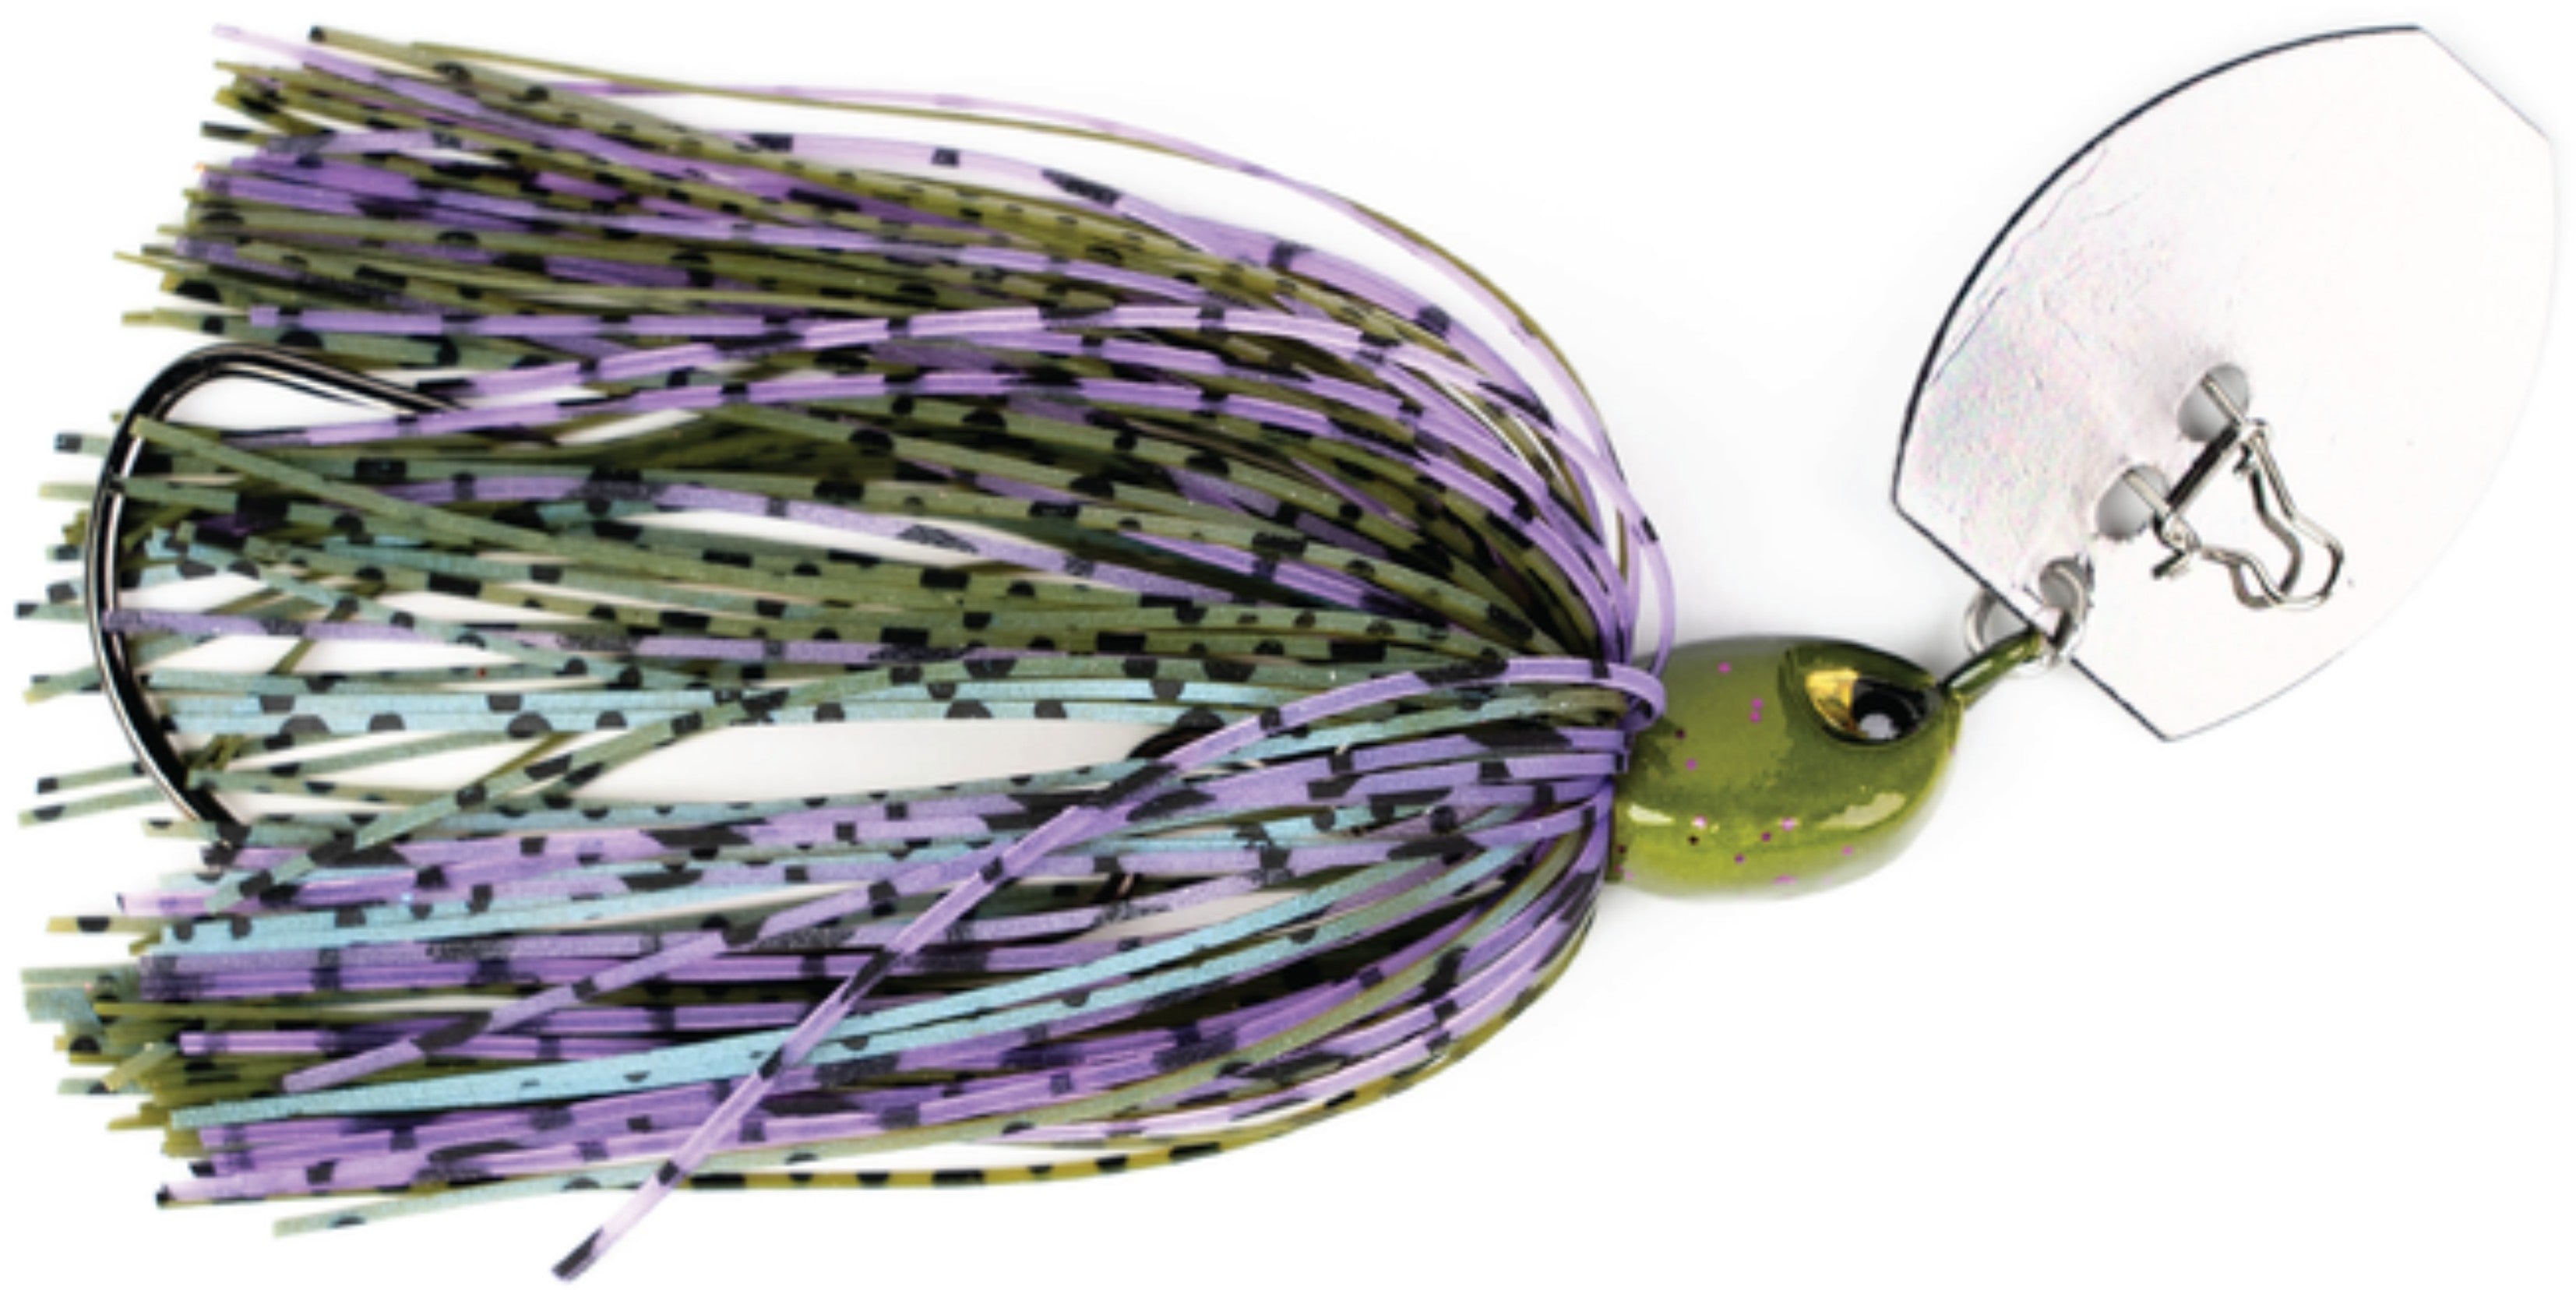 weedless fishing lures, weedless fishing lures Suppliers and Manufacturers  at